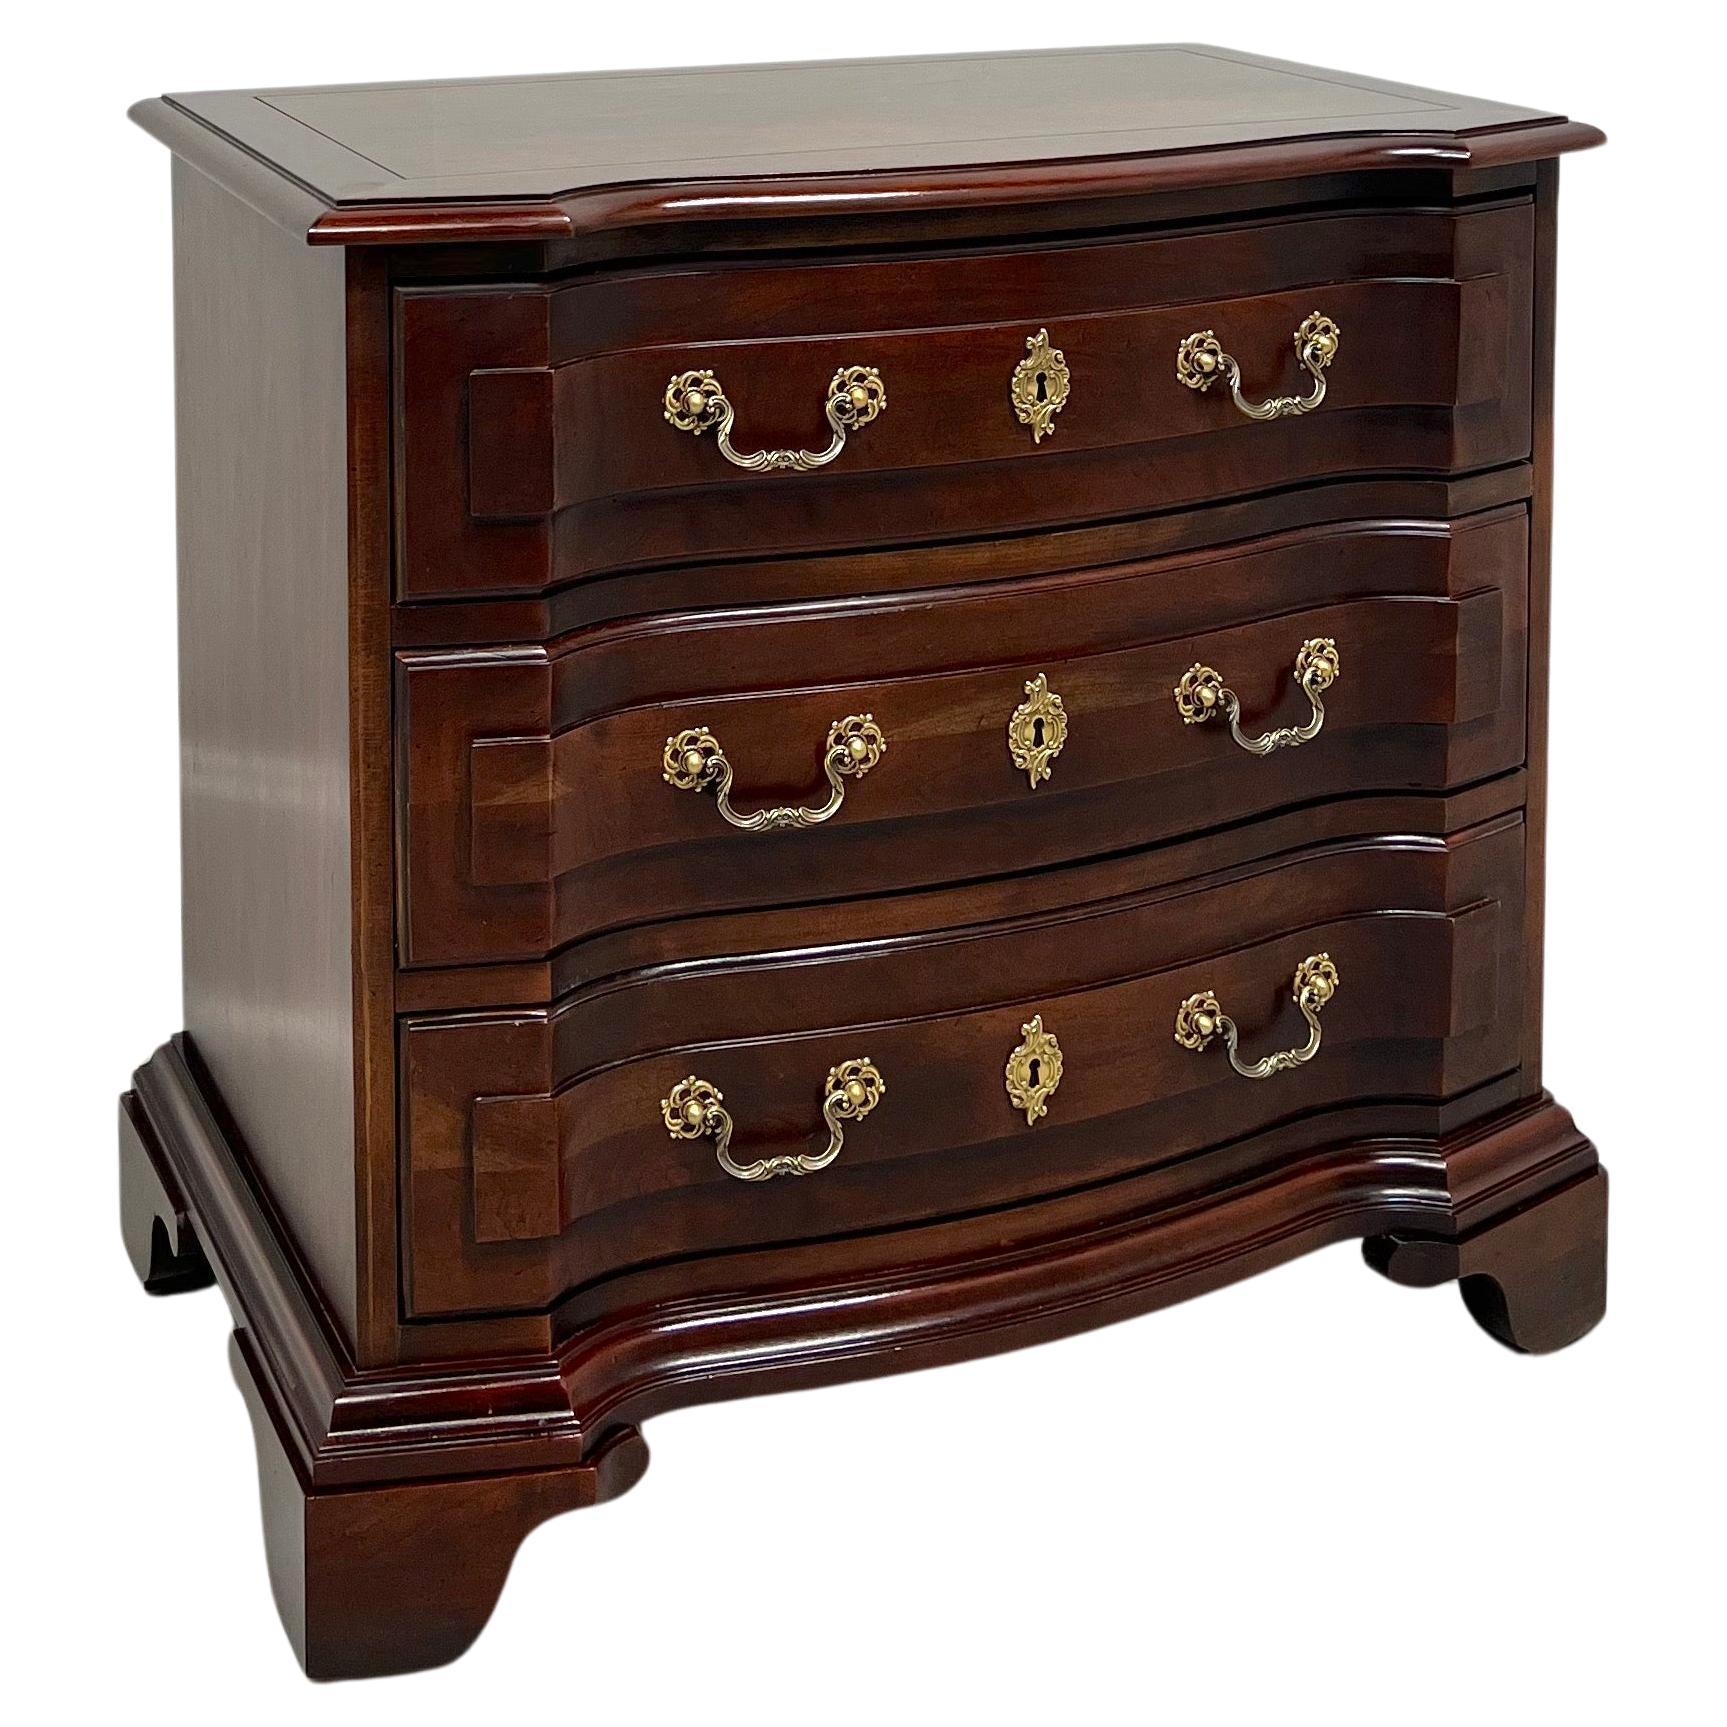 CENTURY Cardella Collection Cherry Italian Provincial Three-Drawer Nightstand